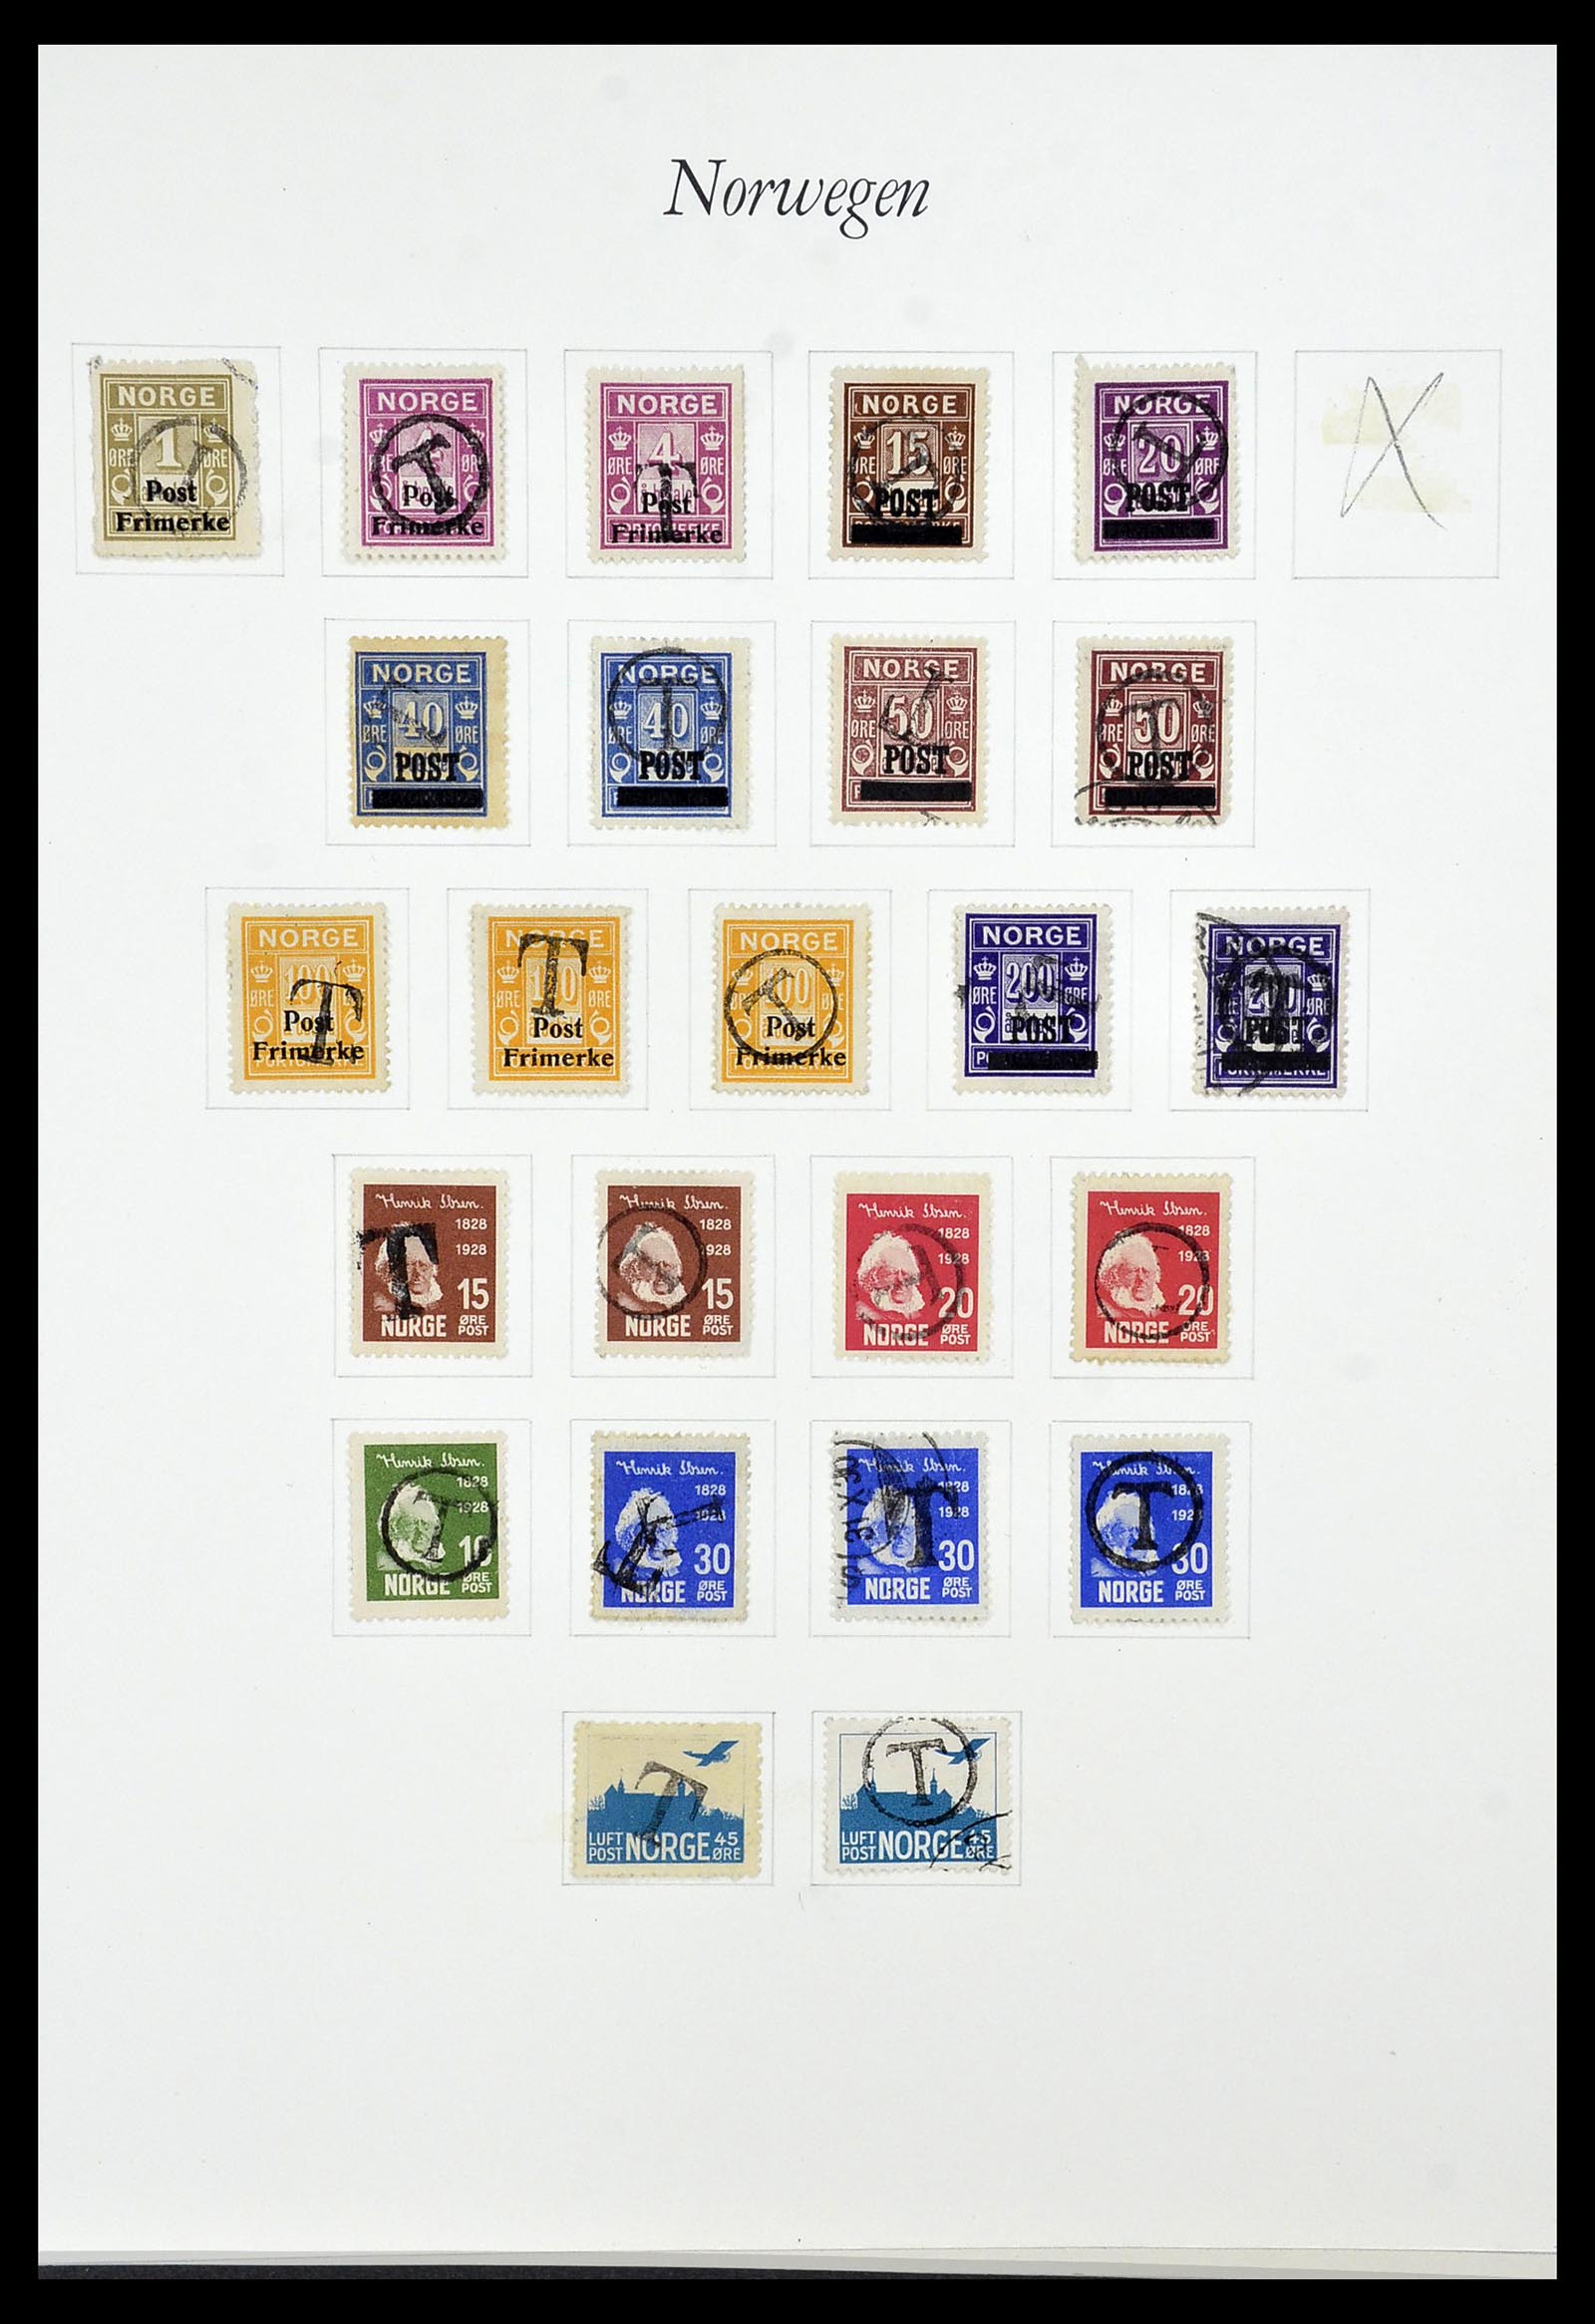 34154 016 - Stamp collection 34154 Norway postage dues 1883-1973.